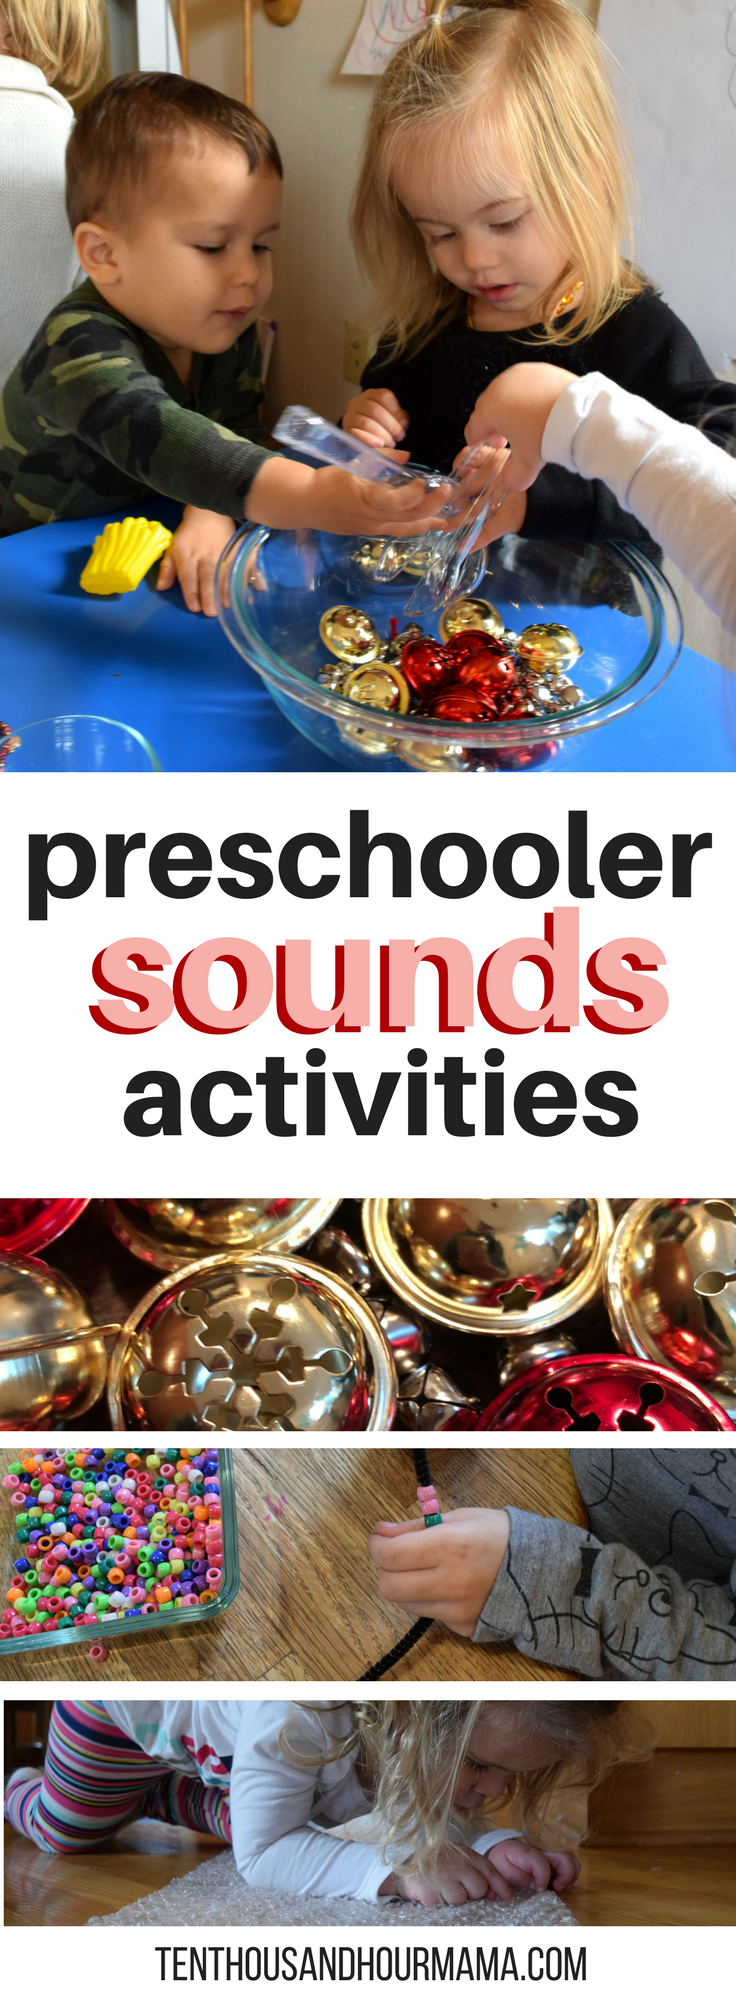 Toddler preschool sounds theme and activities for homeschool - ideas for sensory play. Ten Thousand Hour Mama